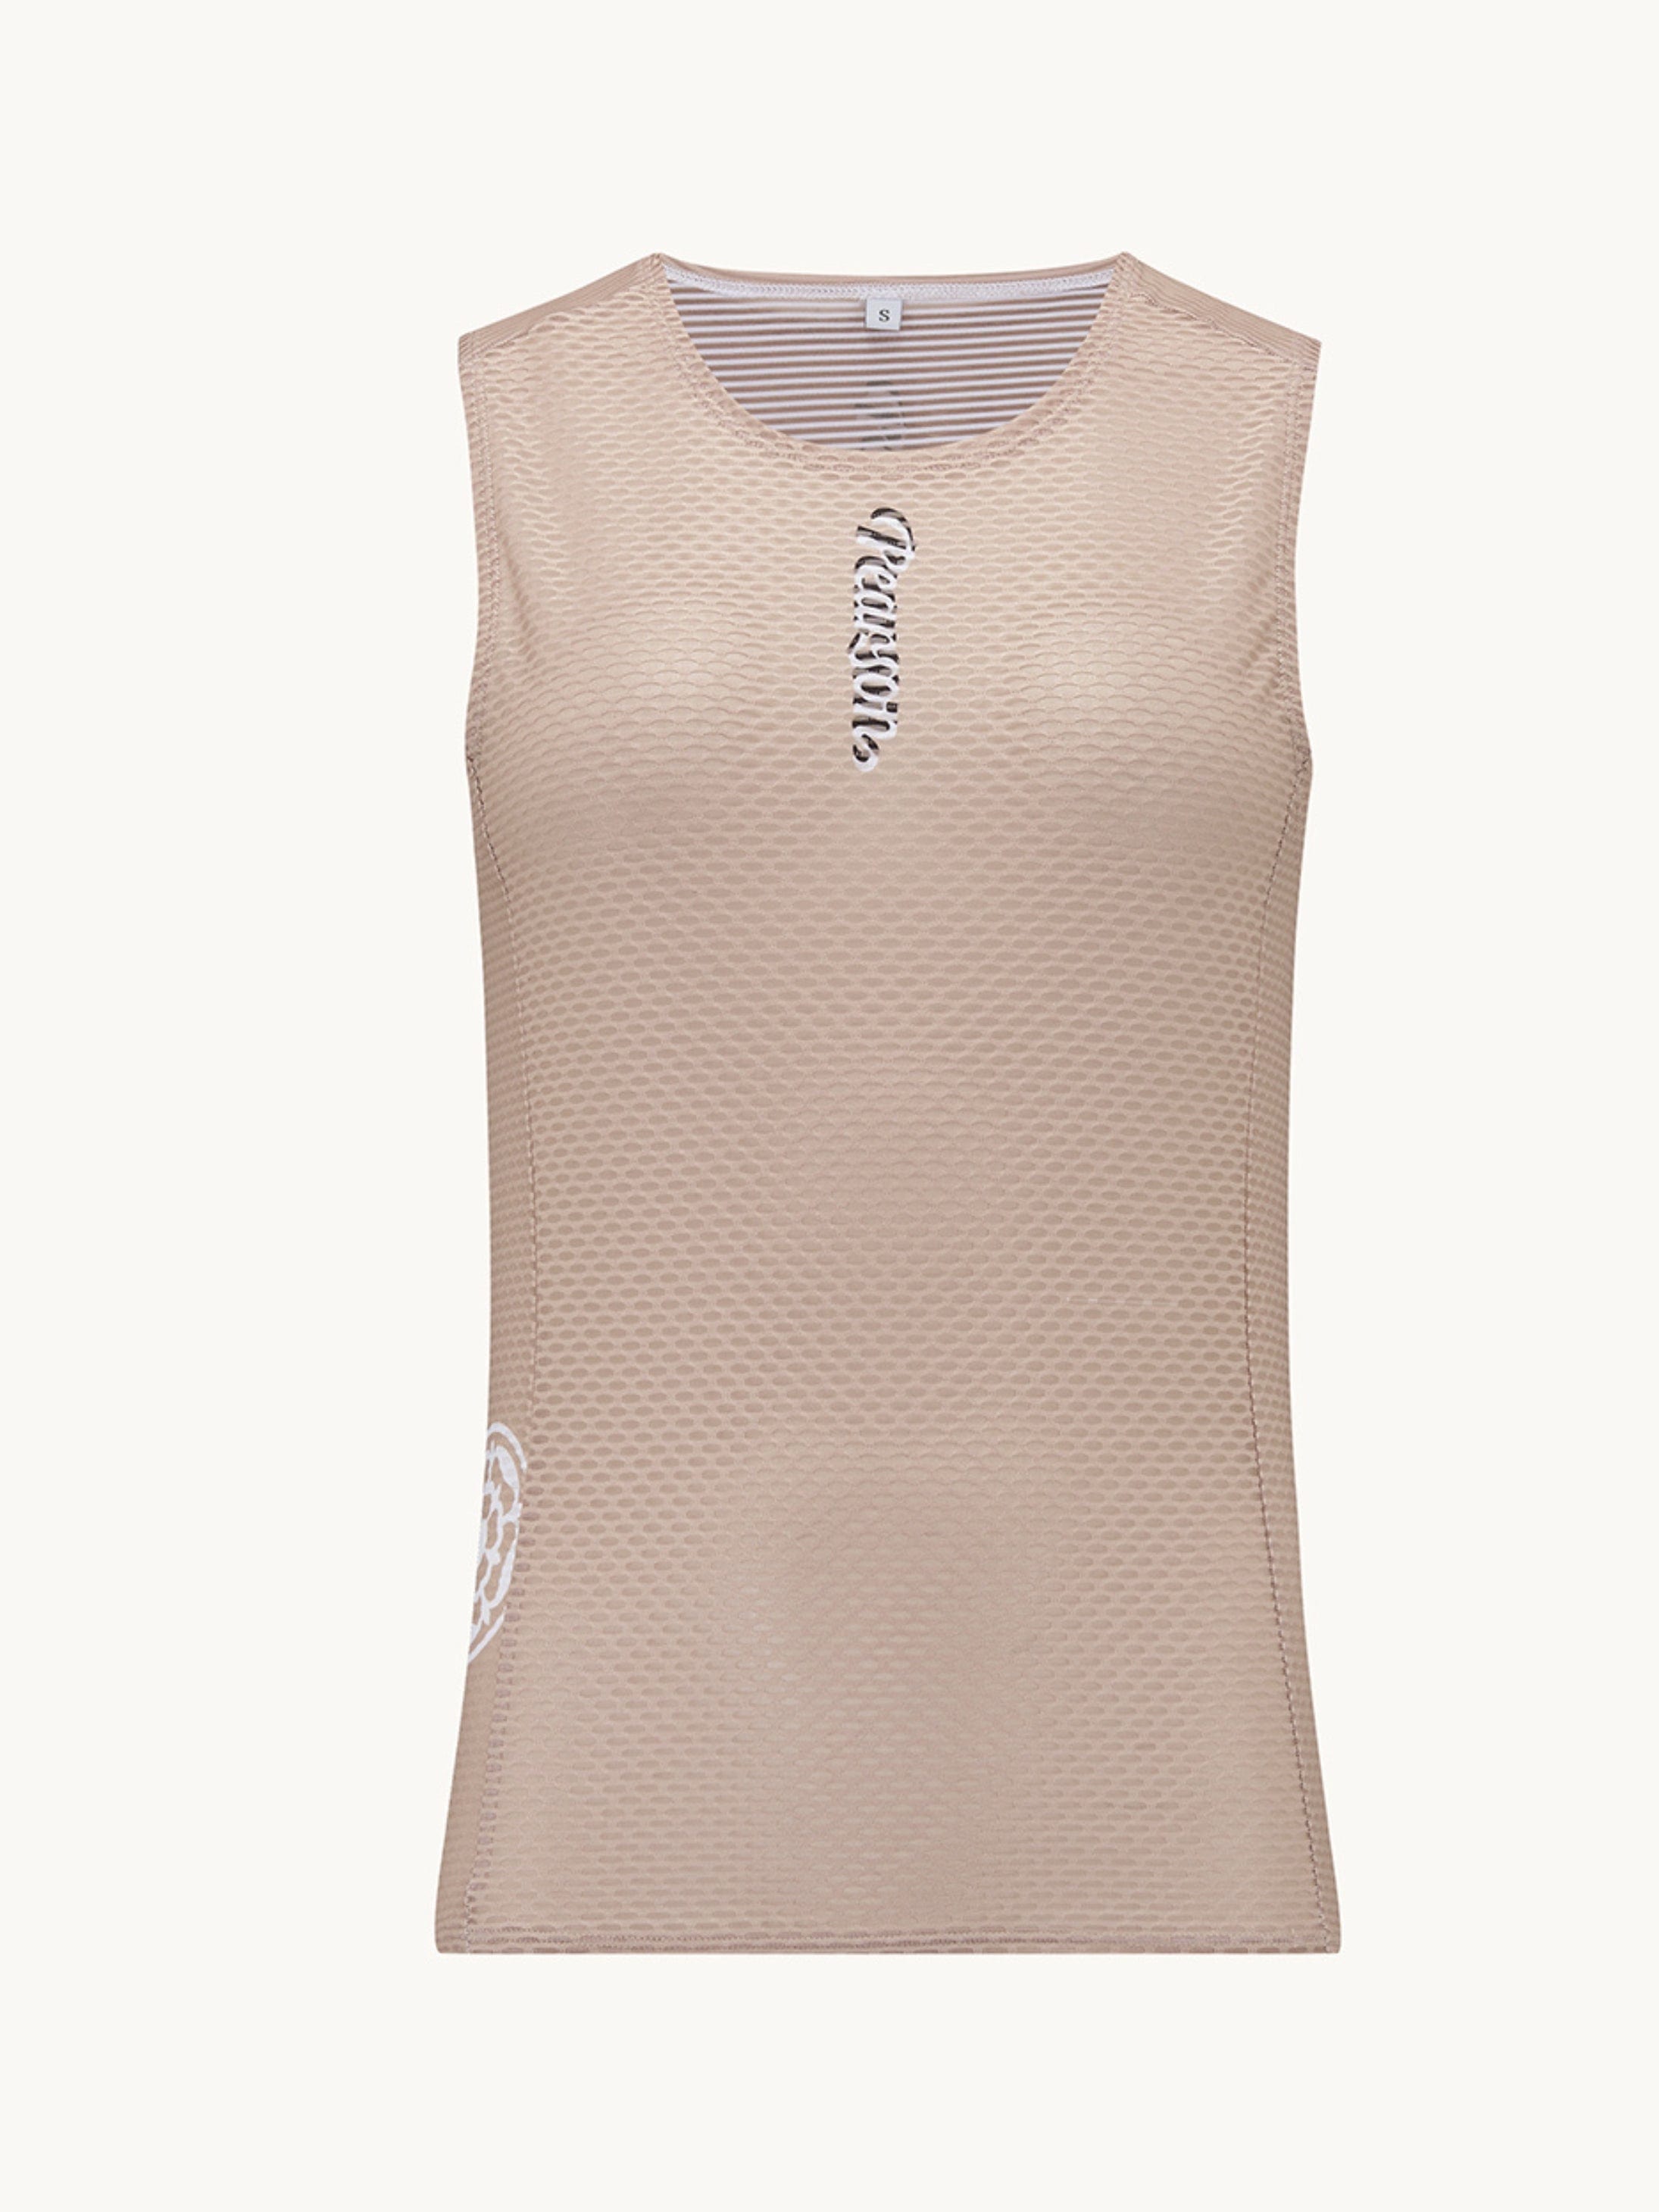 Pearson Cycles Pearson1860, Long Hot Summer - Unisex Sleeveless Base Layer Sand, Sand / S